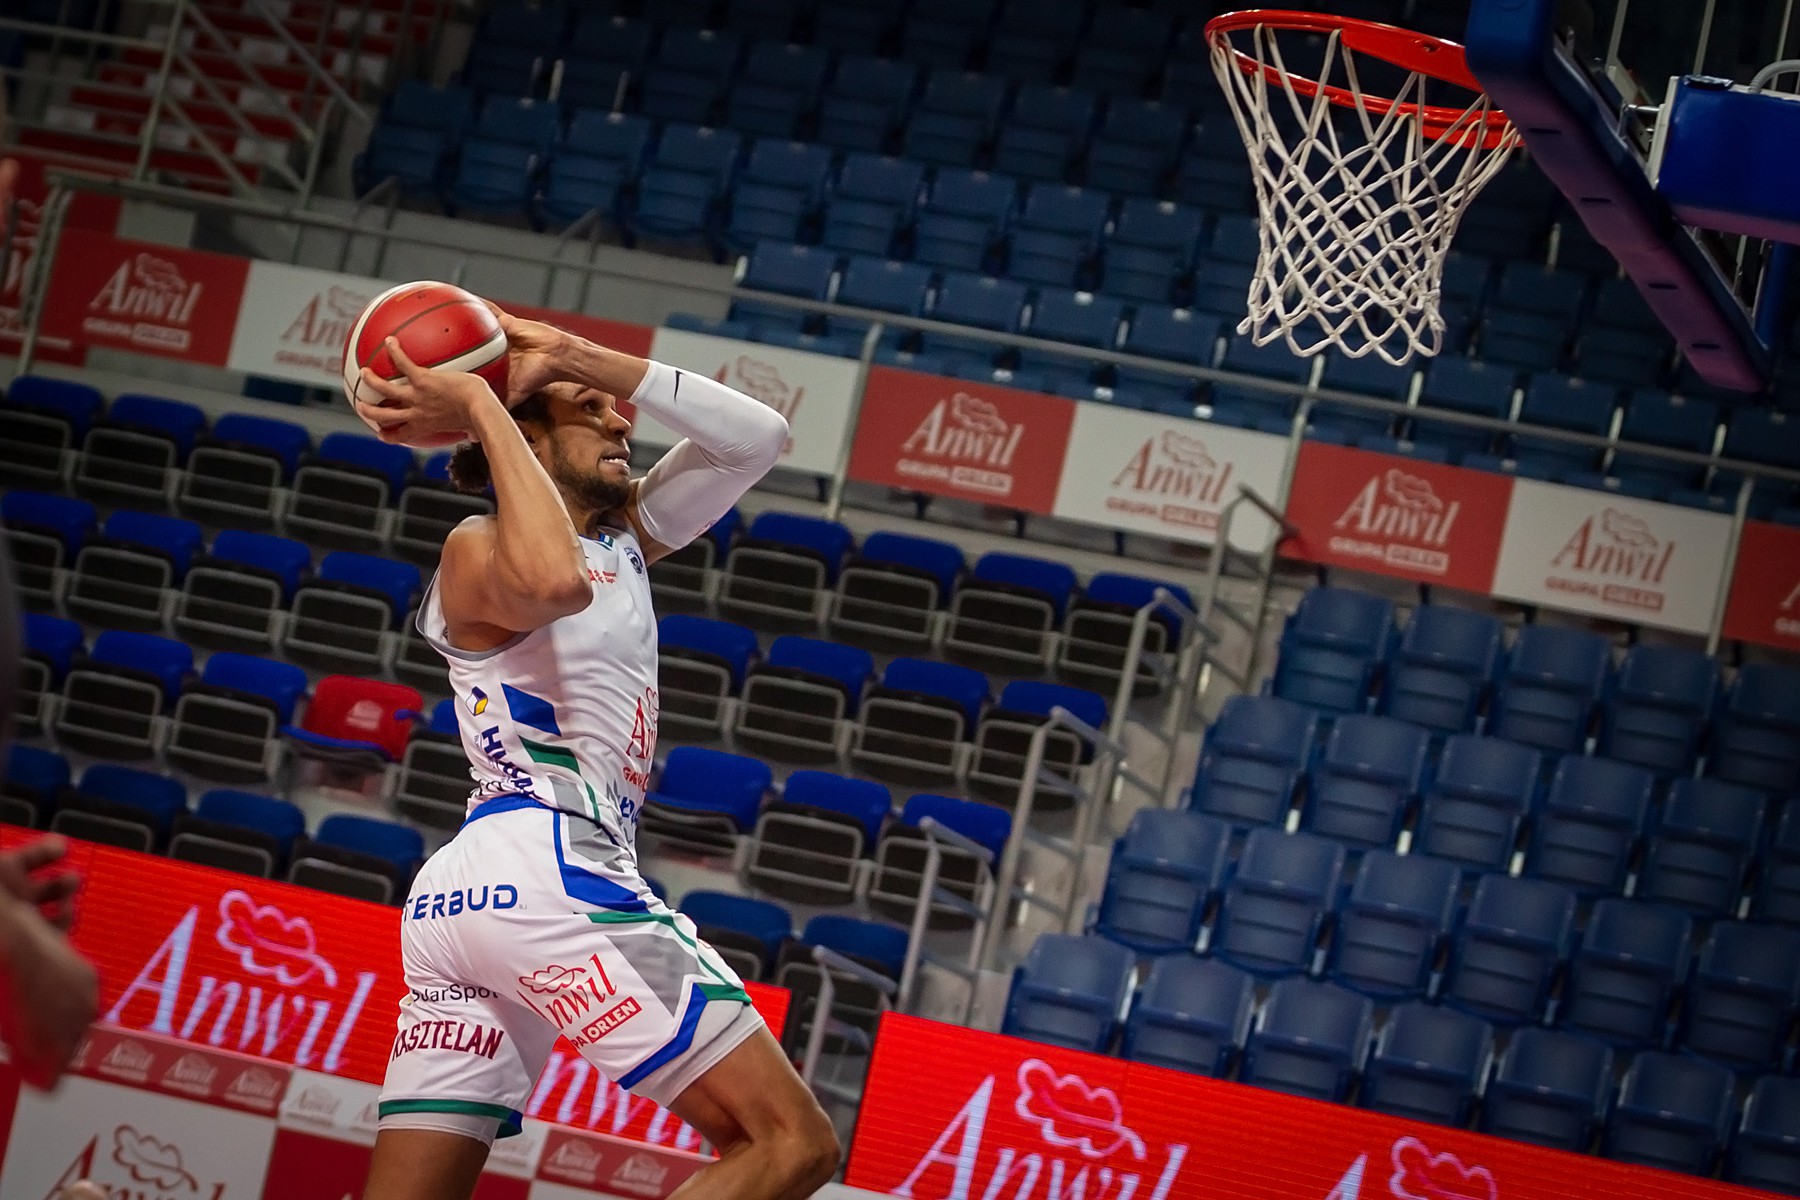 Anwil’s Domination At The End 